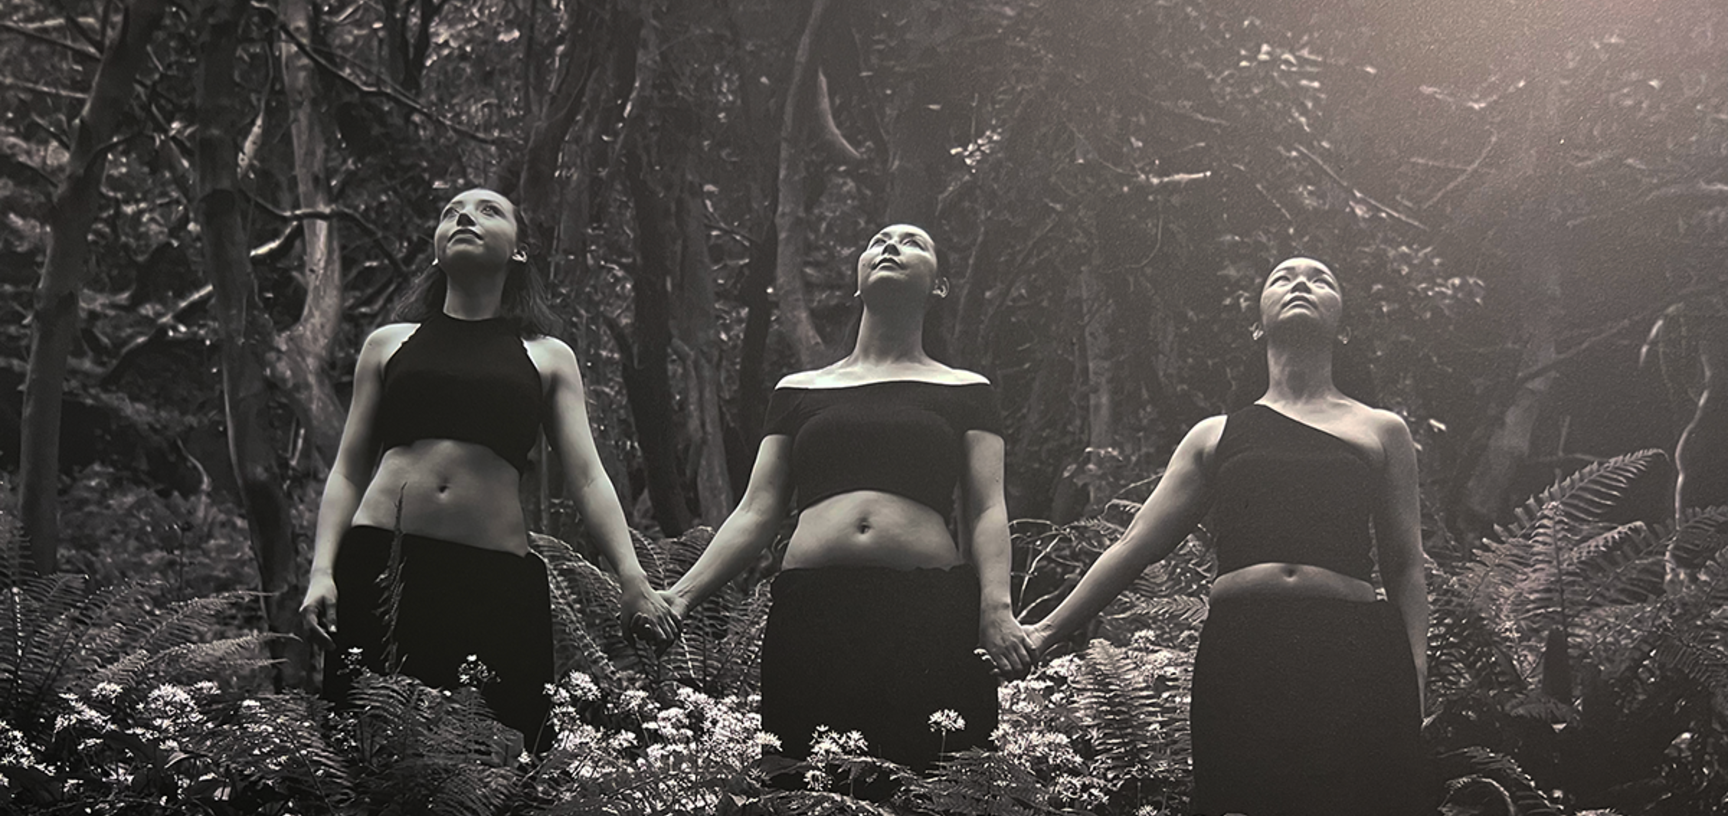 Black and white photograph showing three women standing holding hands in a forest setting